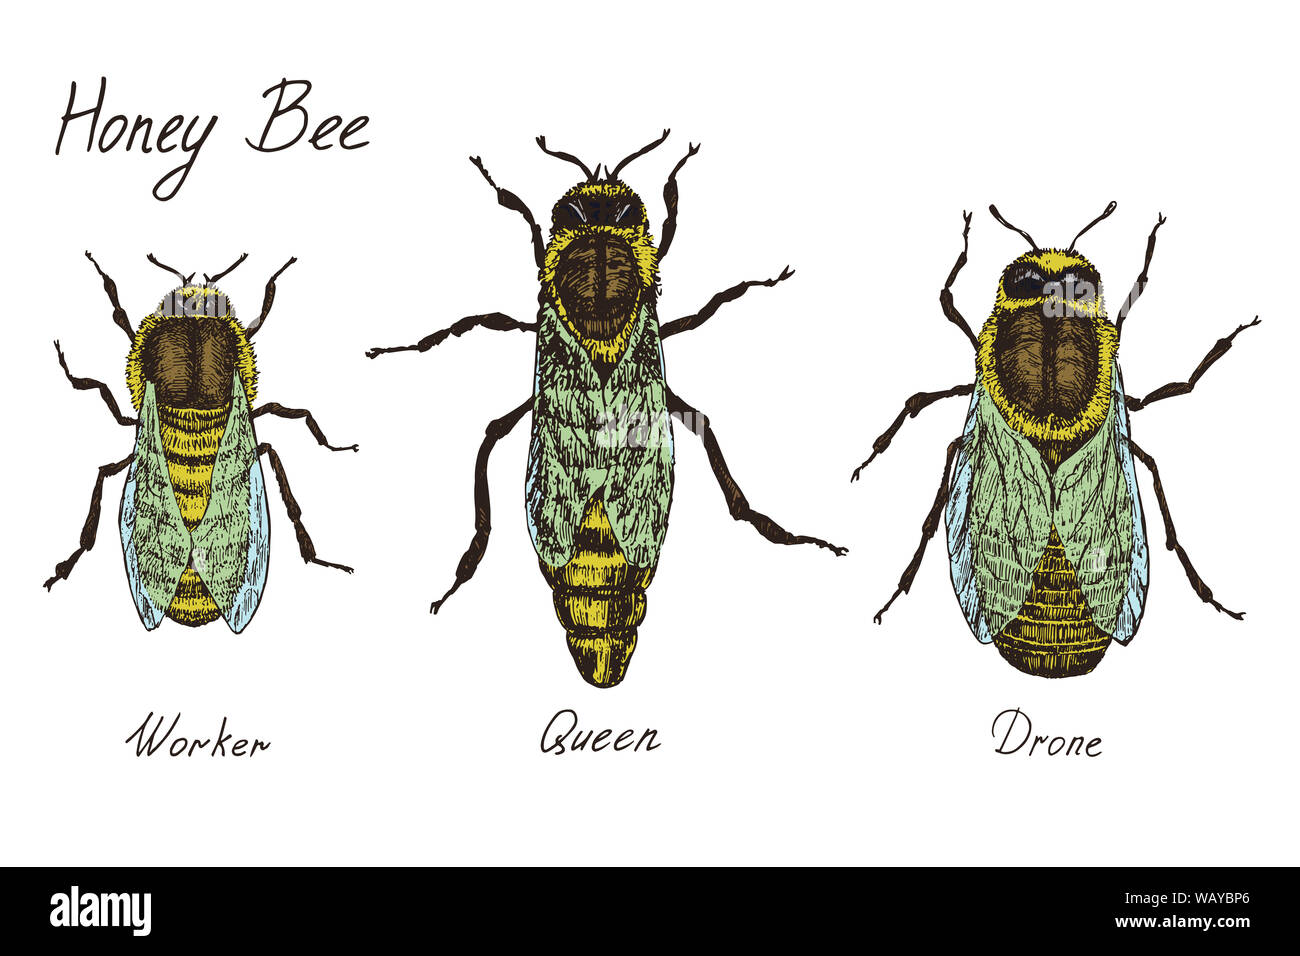 Honey bee archetypical caste specimens,  worker, queen and drone, high quality vintage engraved color illustration style, hand drawn doodle, sketch Stock Photo